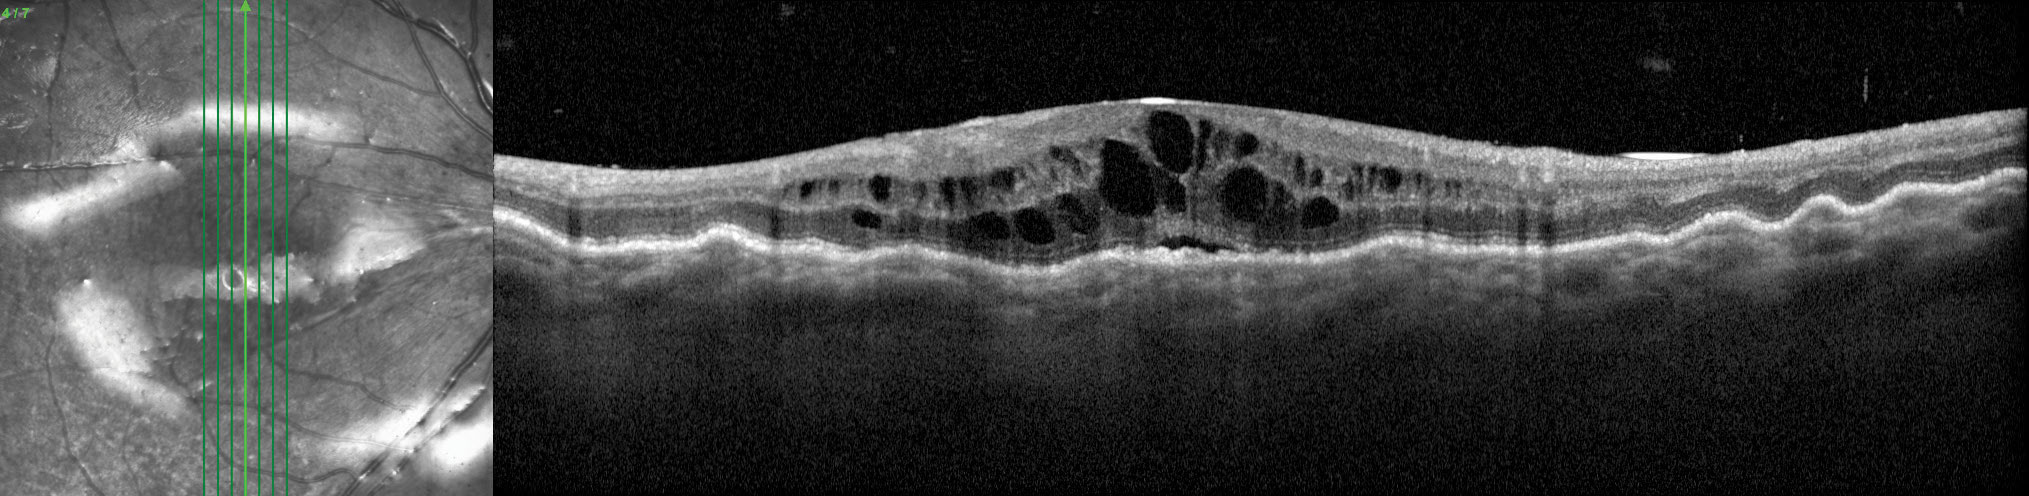 This eye has hypotony maculopathy with choroidal folds, intraretinal and subretinal fluid and optic disc edema. His IOP was generally between 2mm Hg and 5mm Hg. 